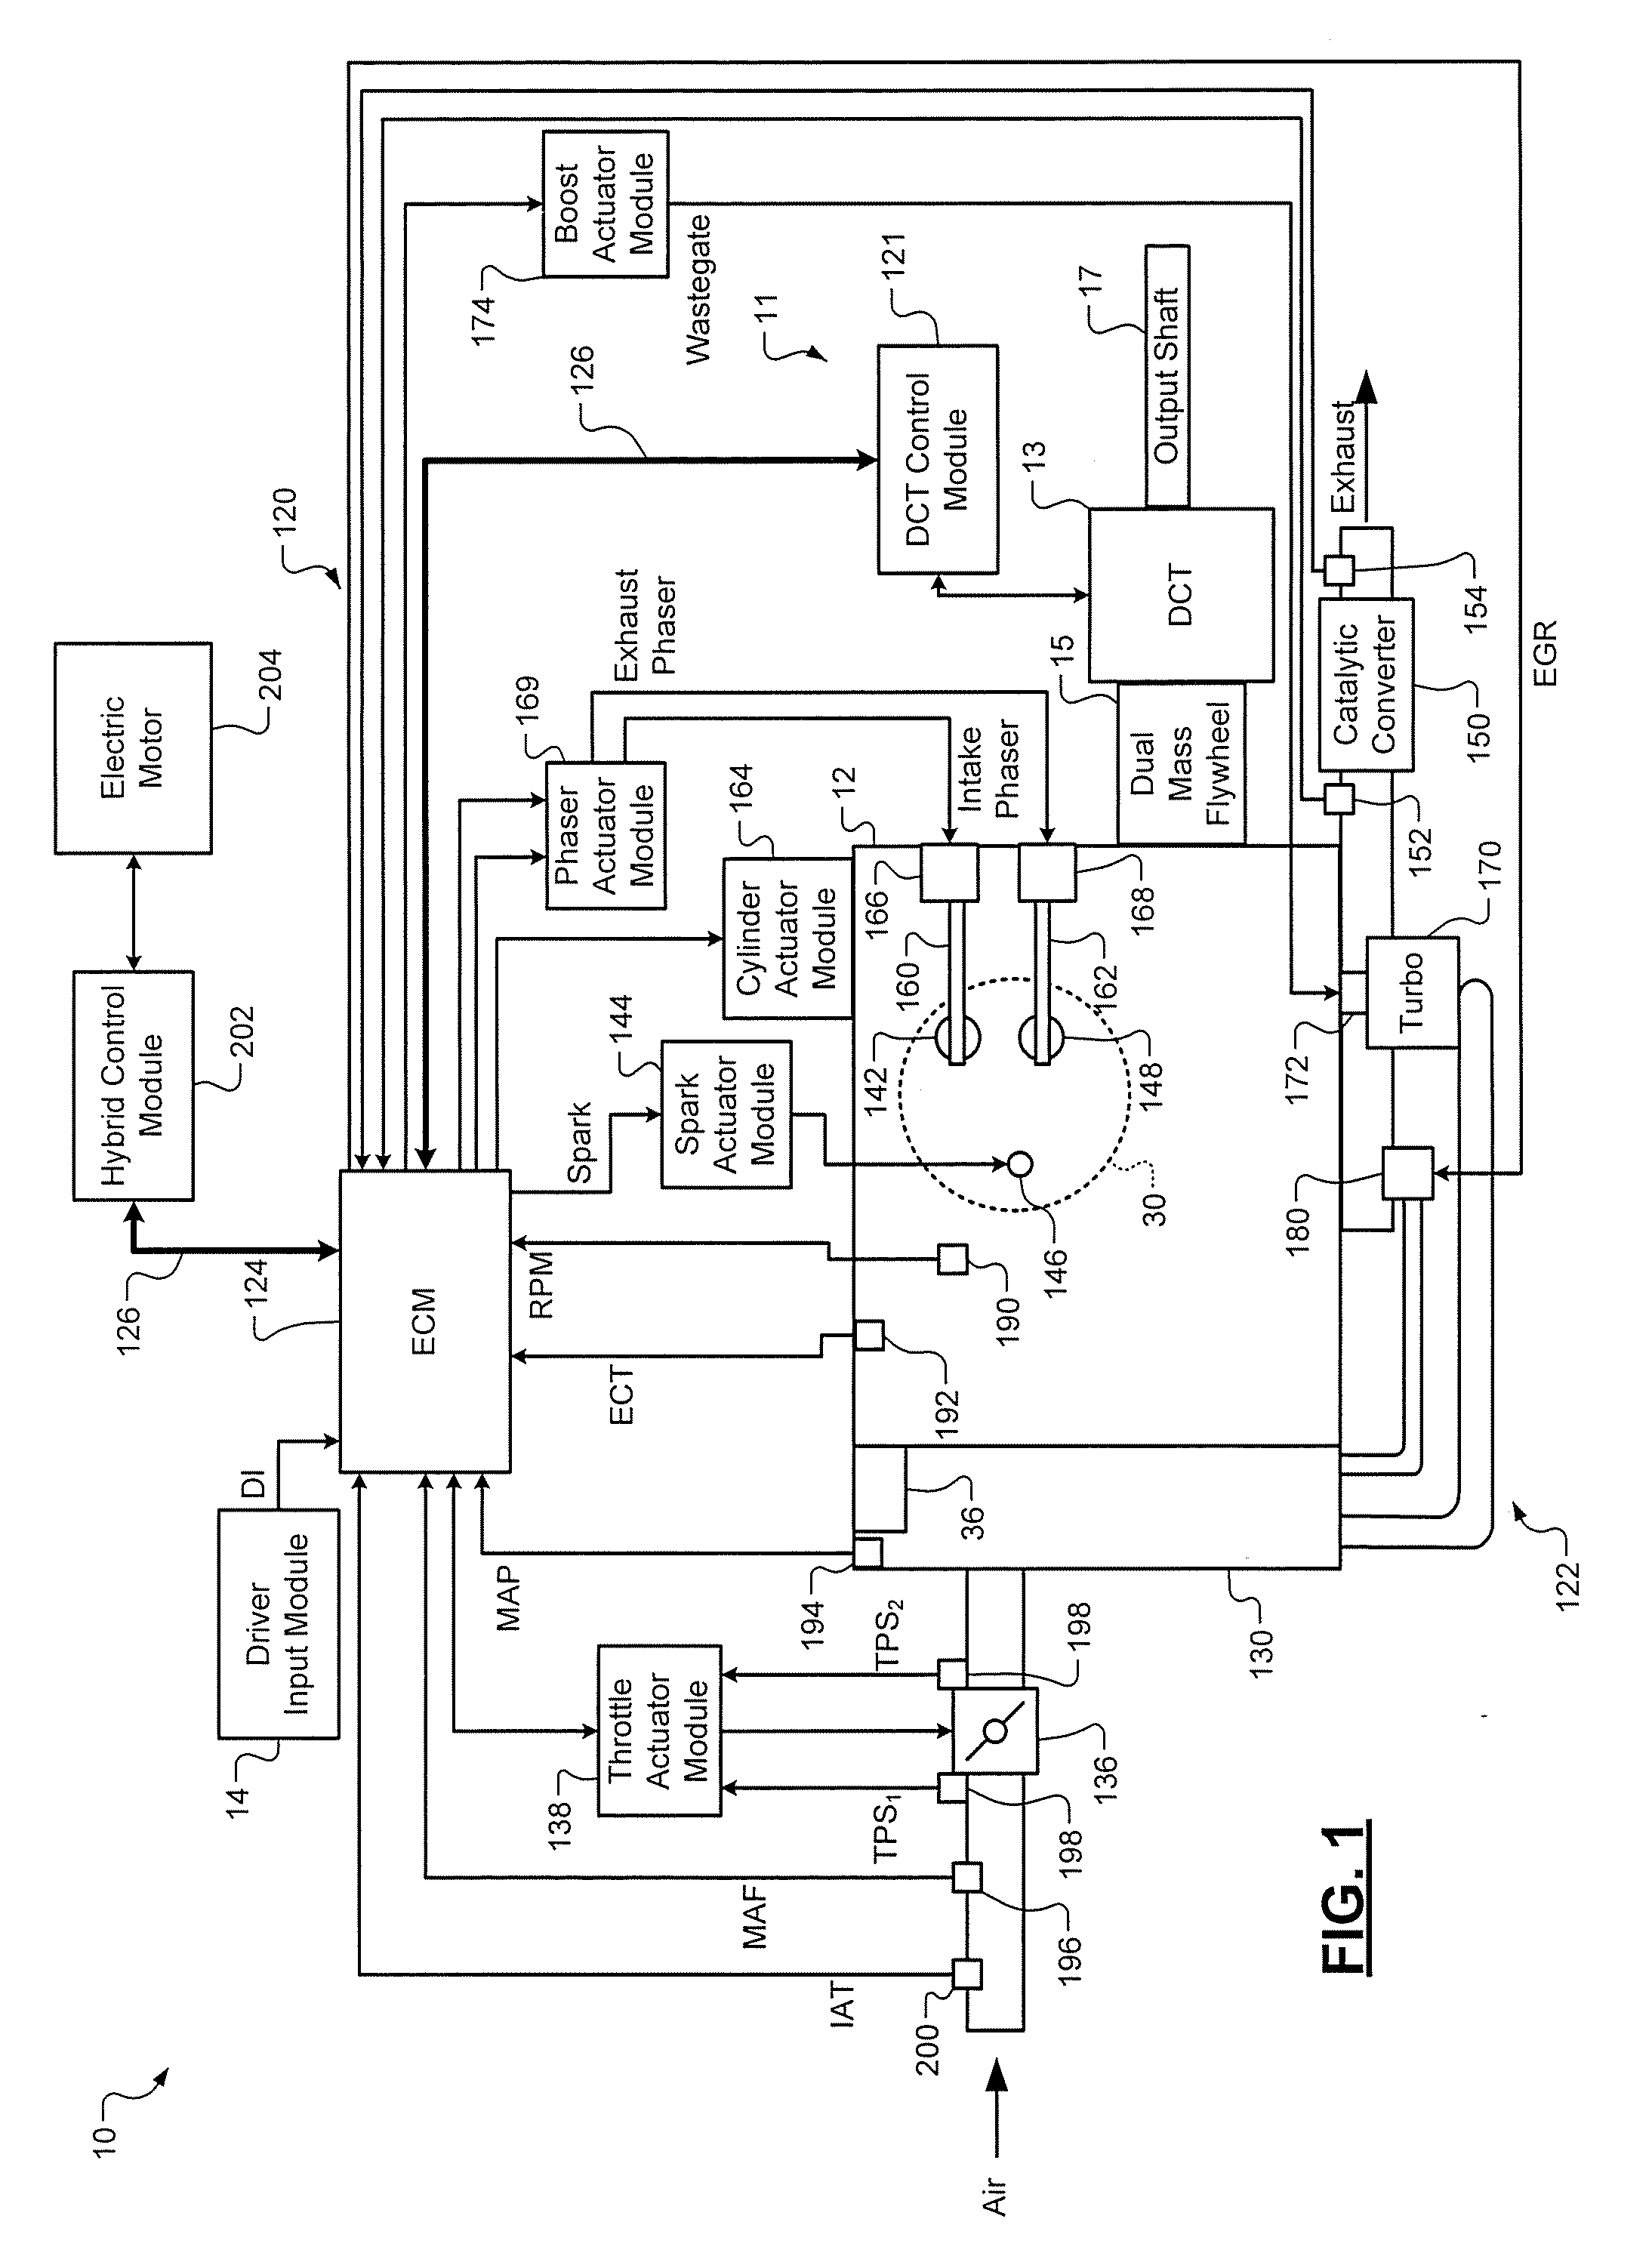 Shift sequencing systems for a dual clutch transmission